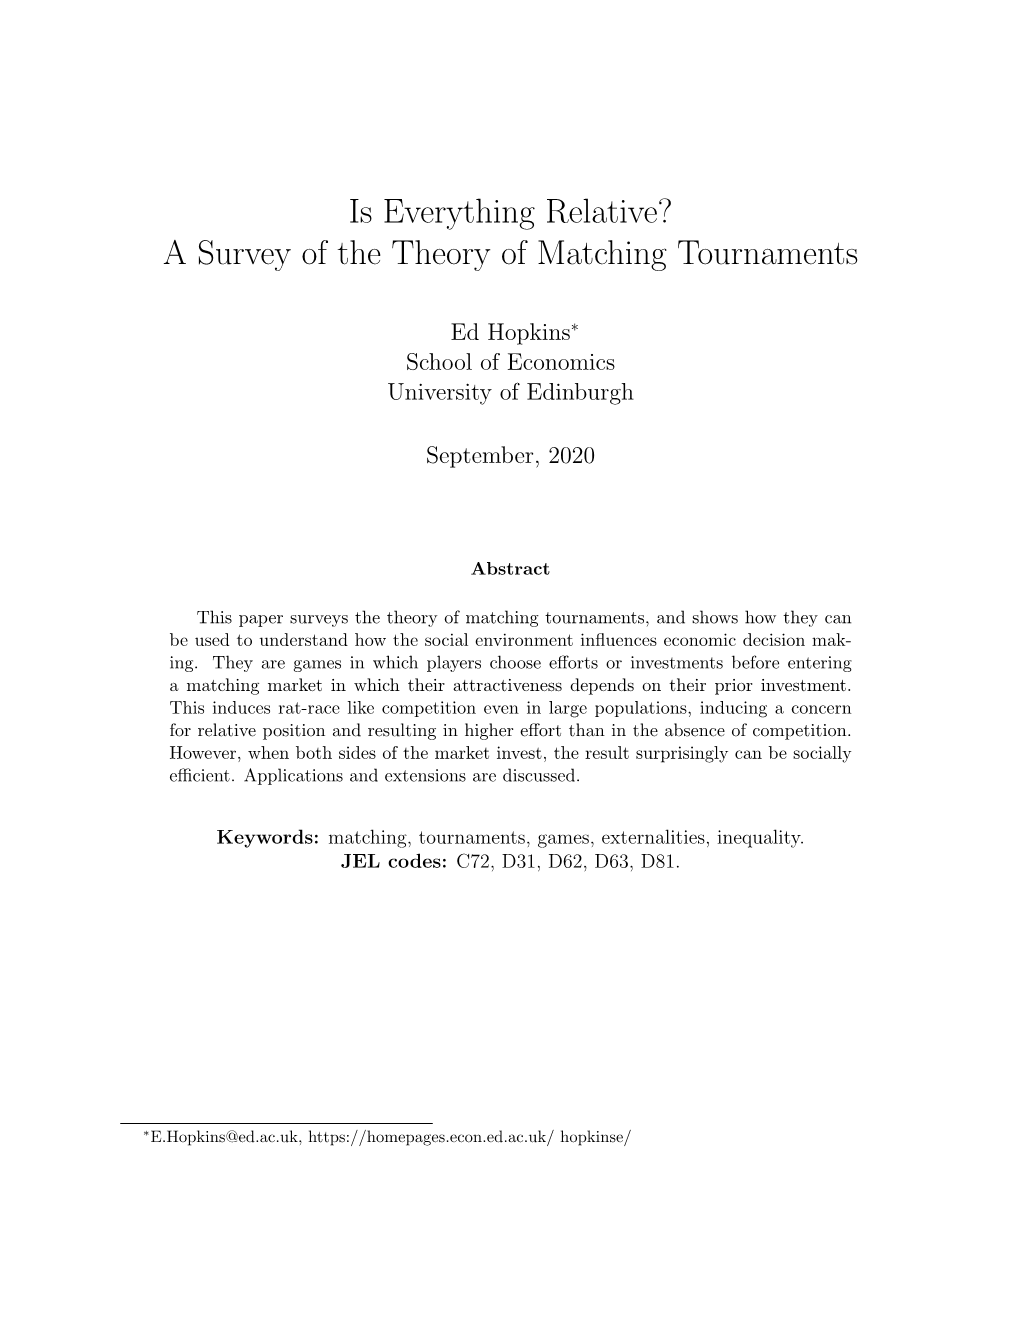 Is Everything Relative? a Survey of the Theory of Matching Tournaments